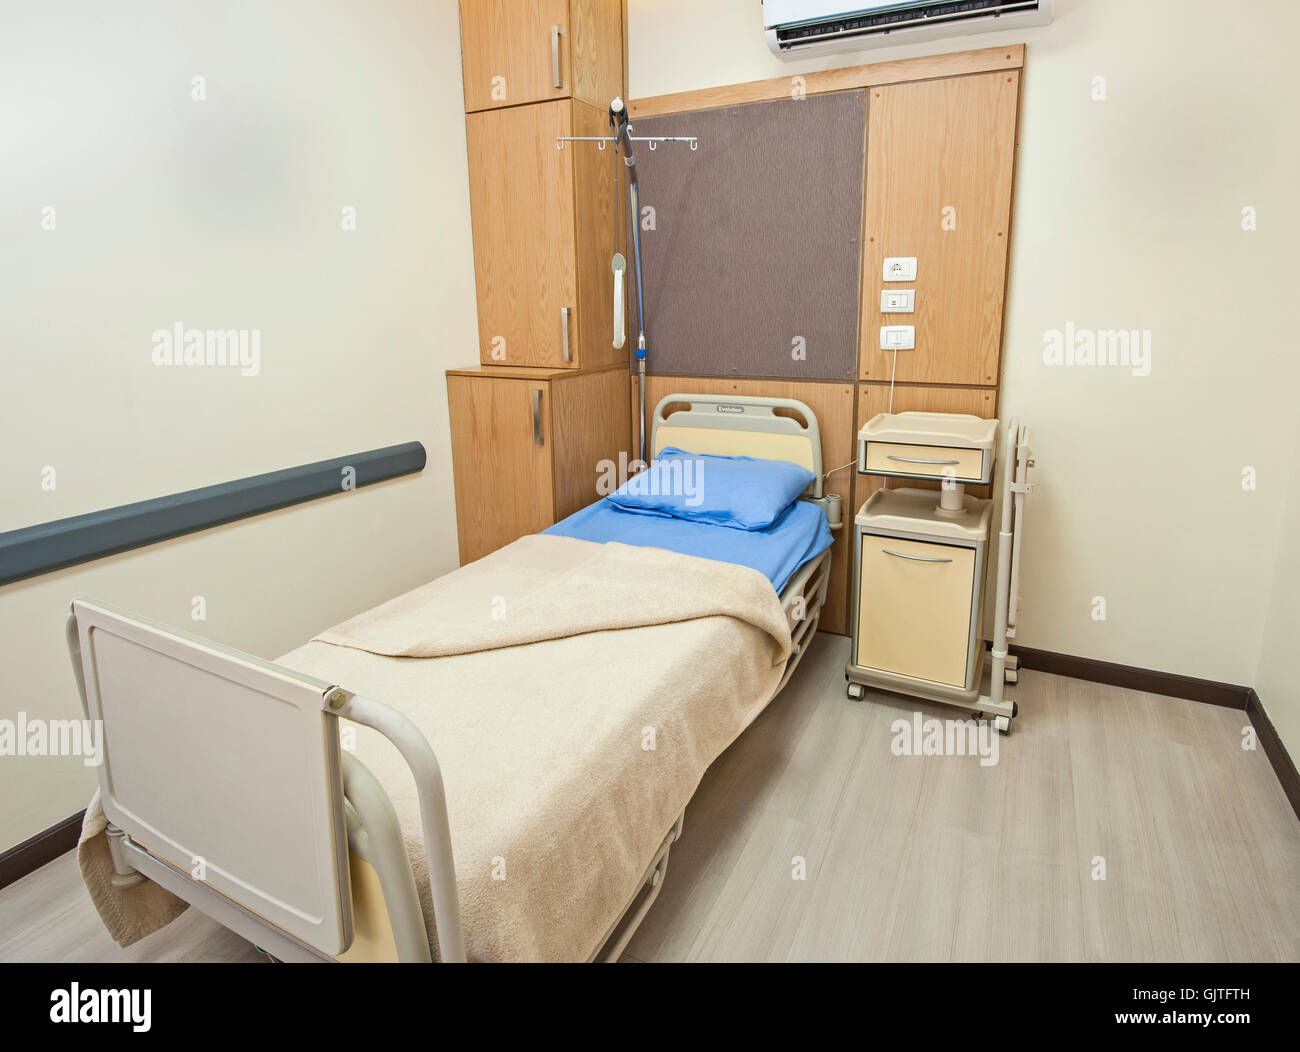 Interior design of a private ward room in hospital medical clinic center Stock Photo